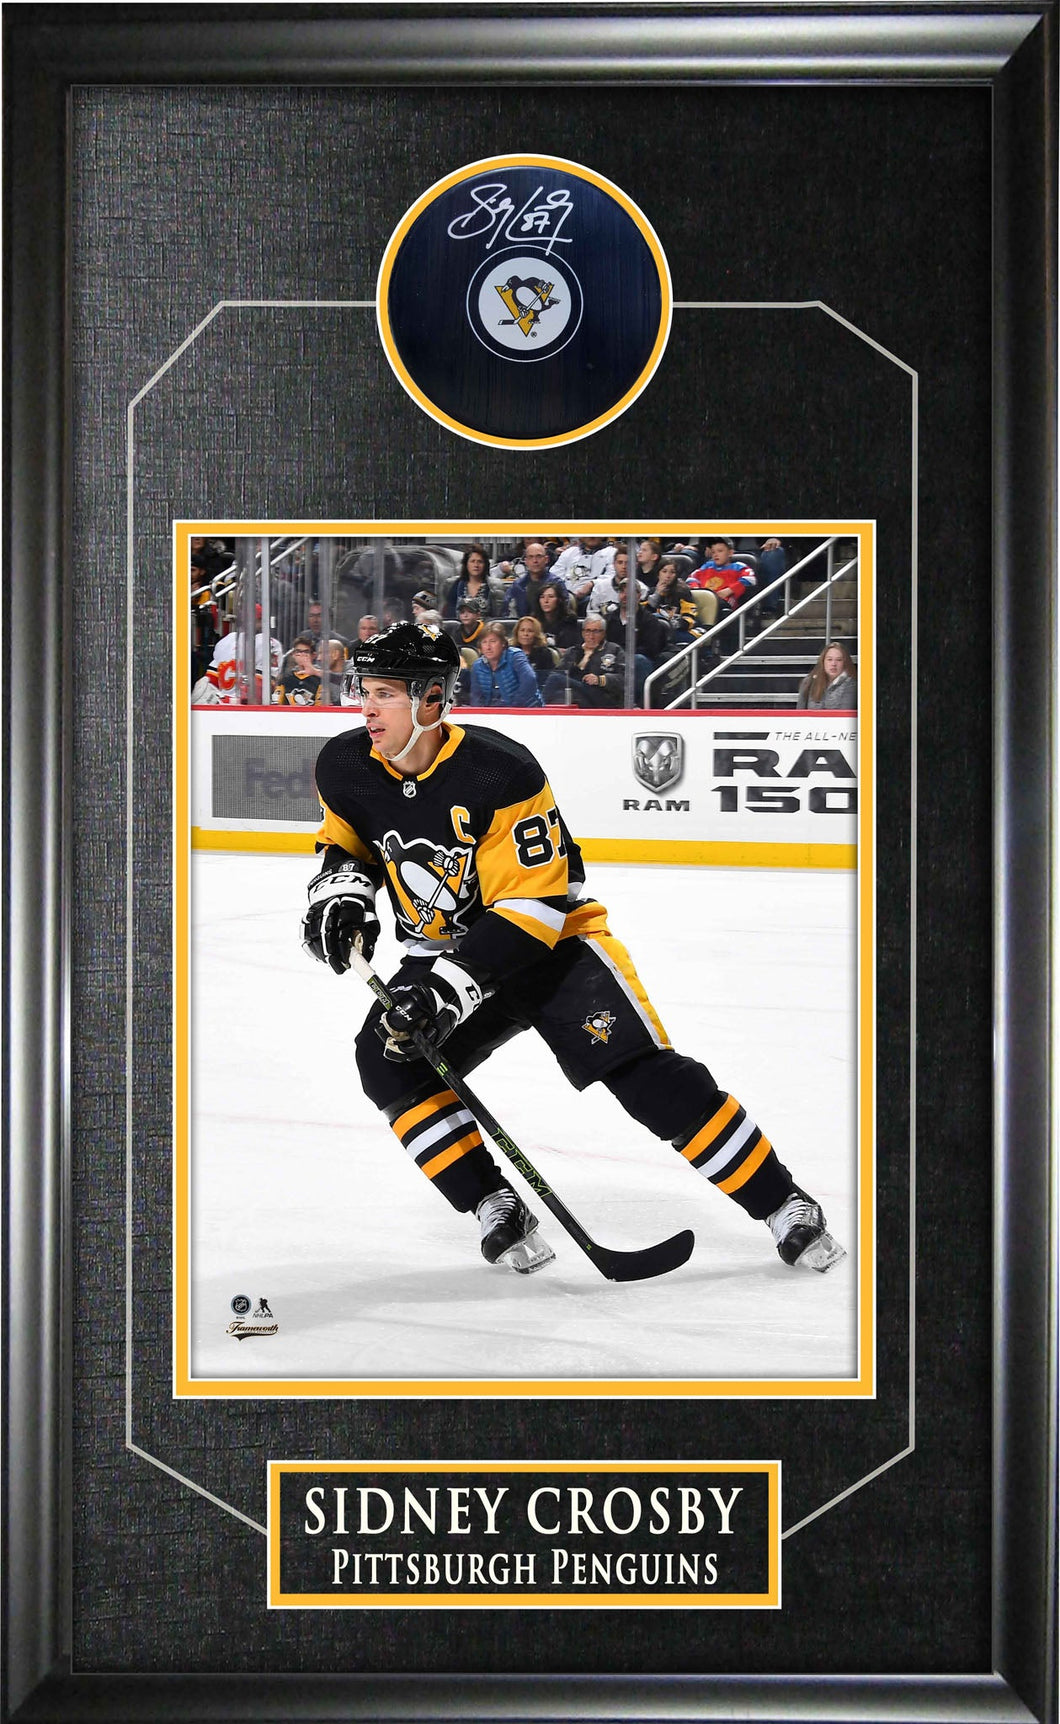 Sidney Crosby Signed Framed Pittsburgh Penguins Puck with 8x10 Photo